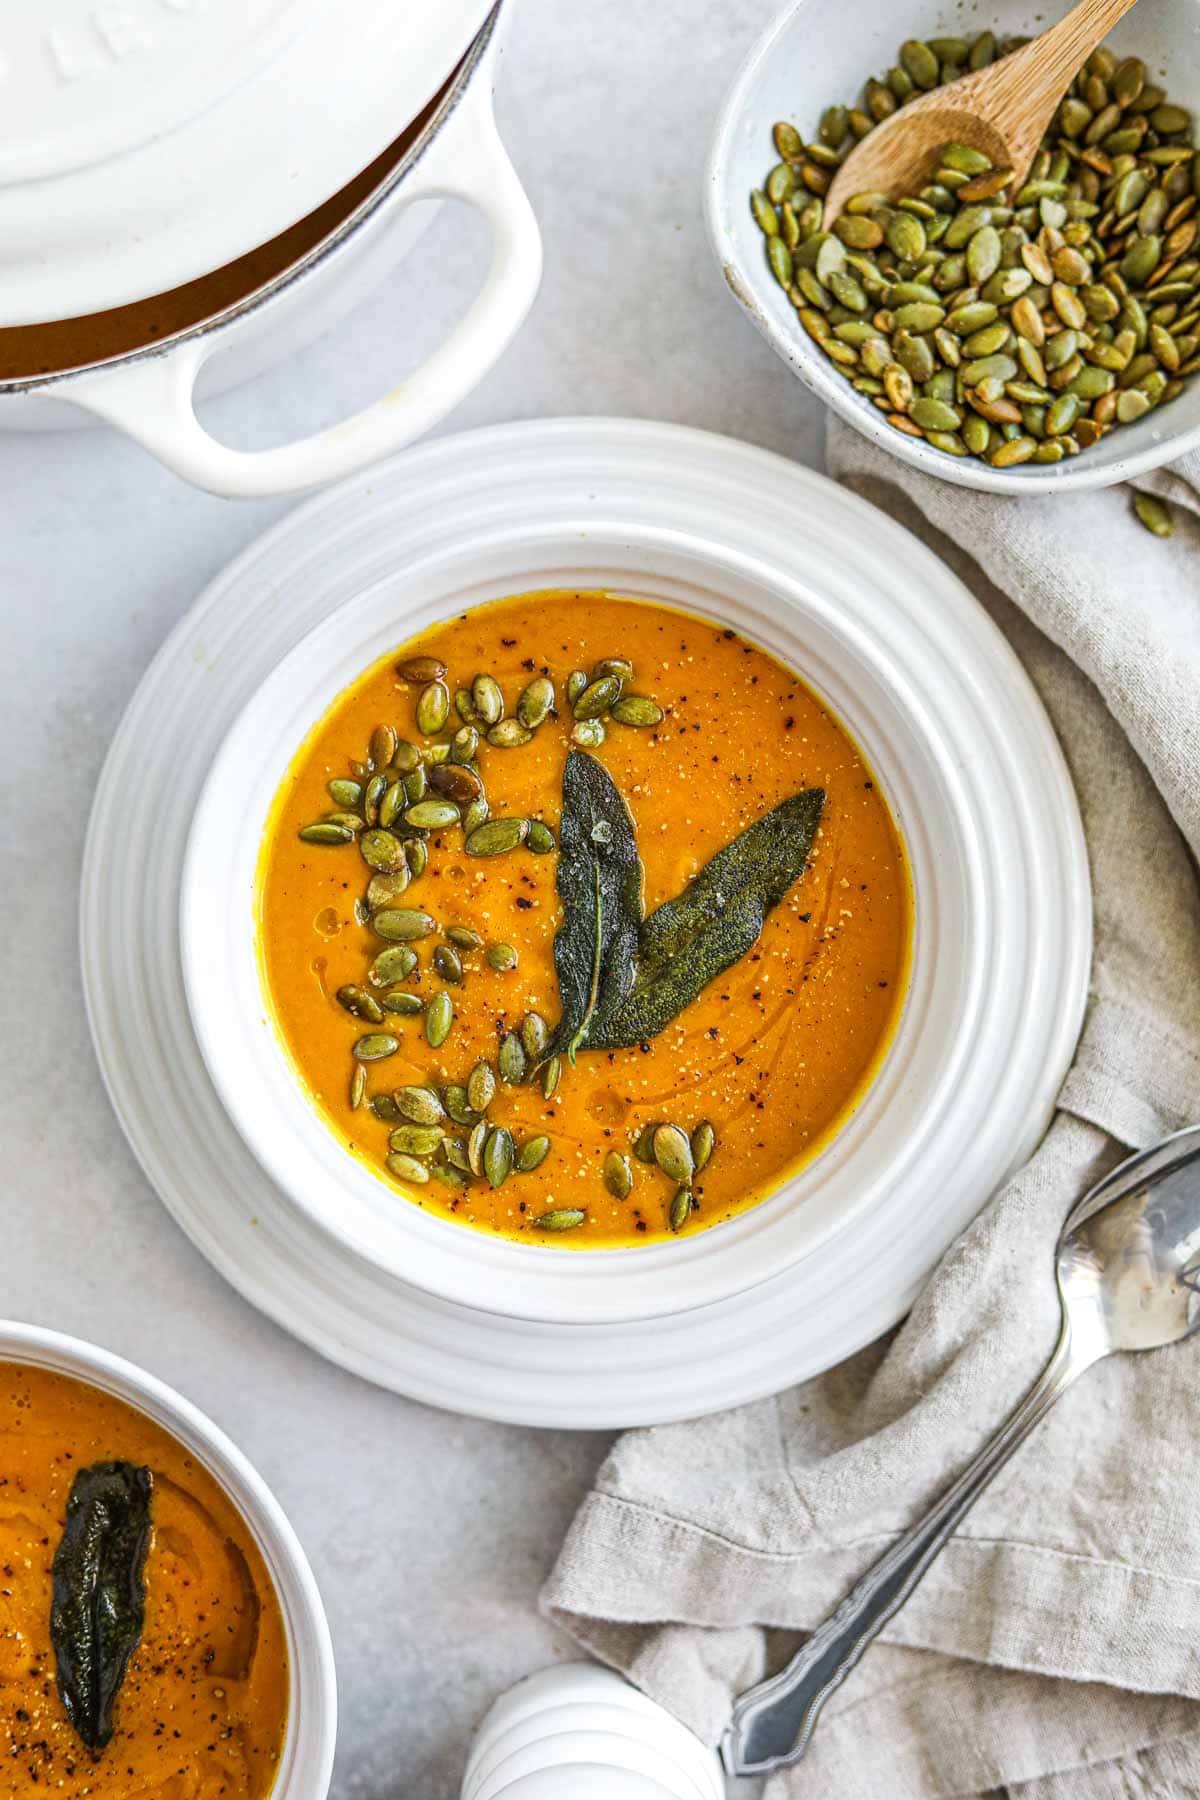 Vegan spiced butternut squash soup in a white Le Creuset bowl topped with roasted pepitas and fried sage leaves.